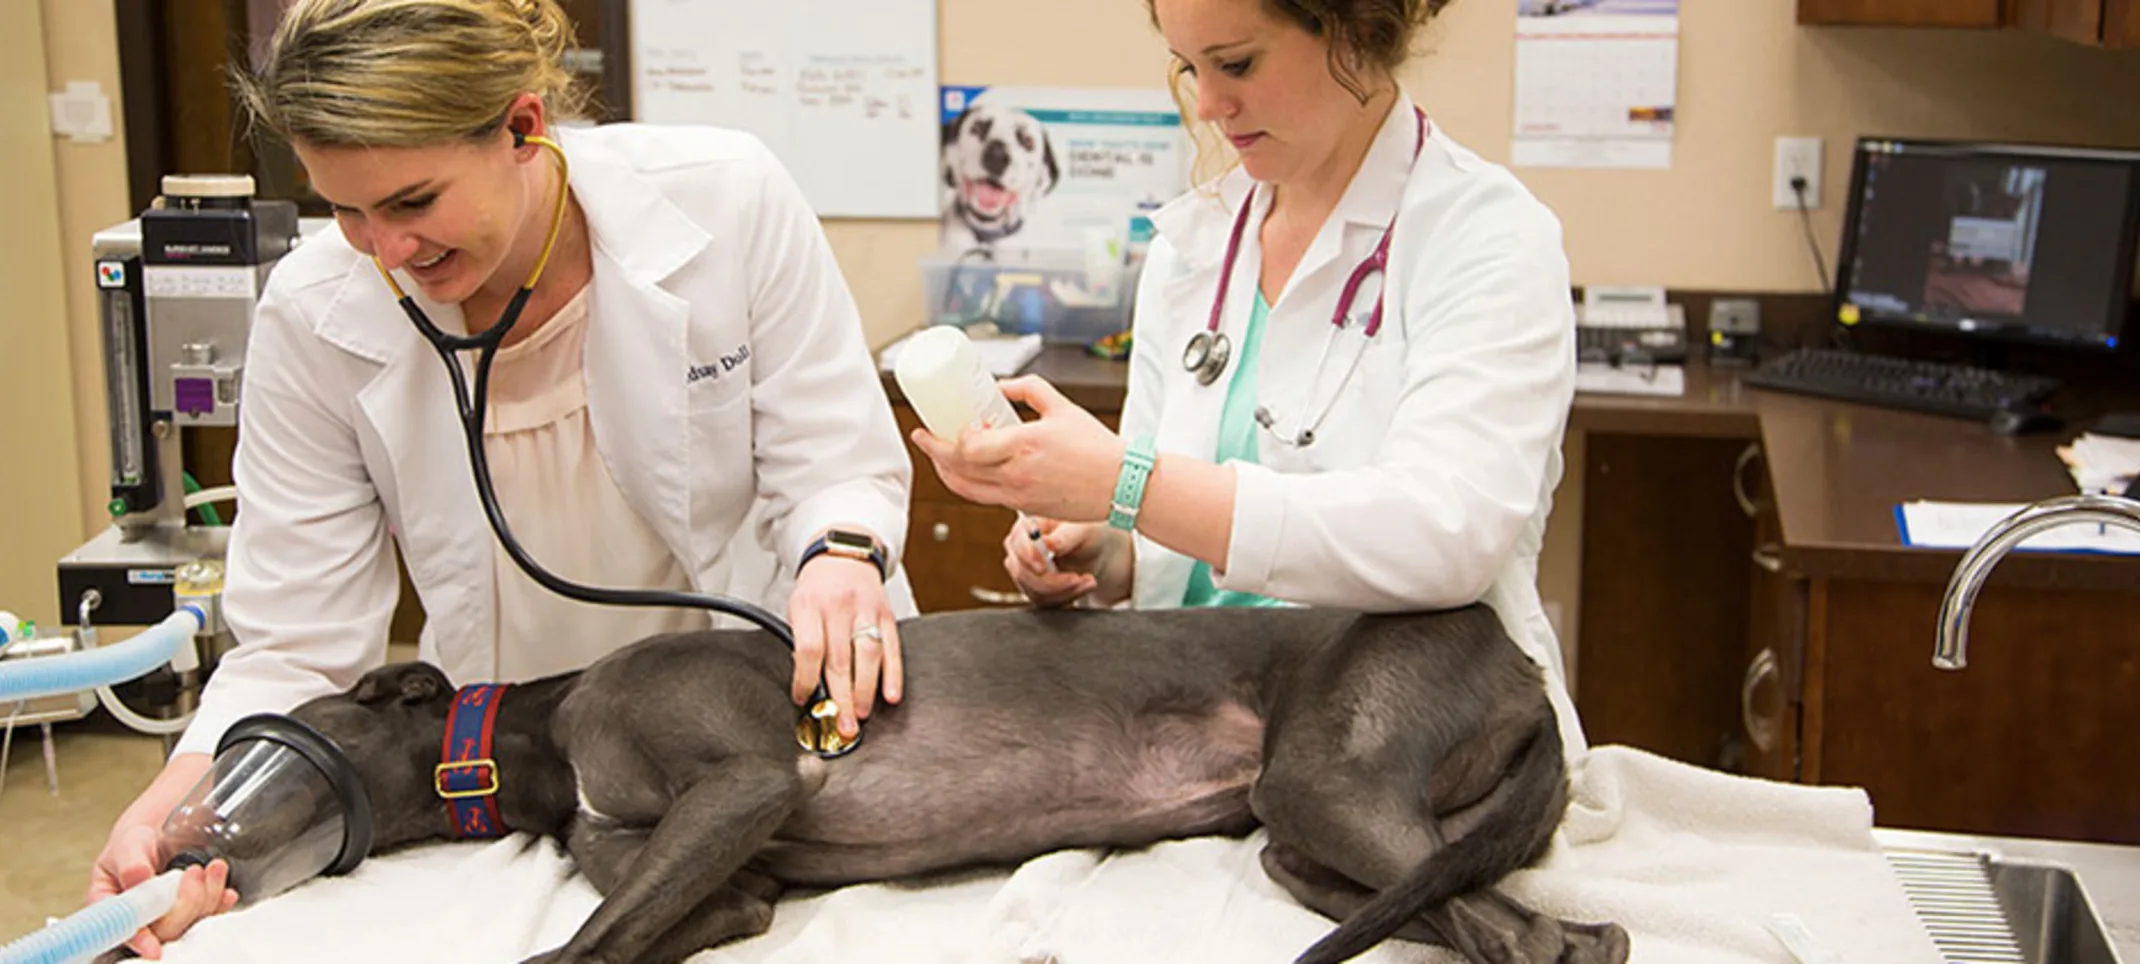 veterinary staff tending to a dog on an exam table